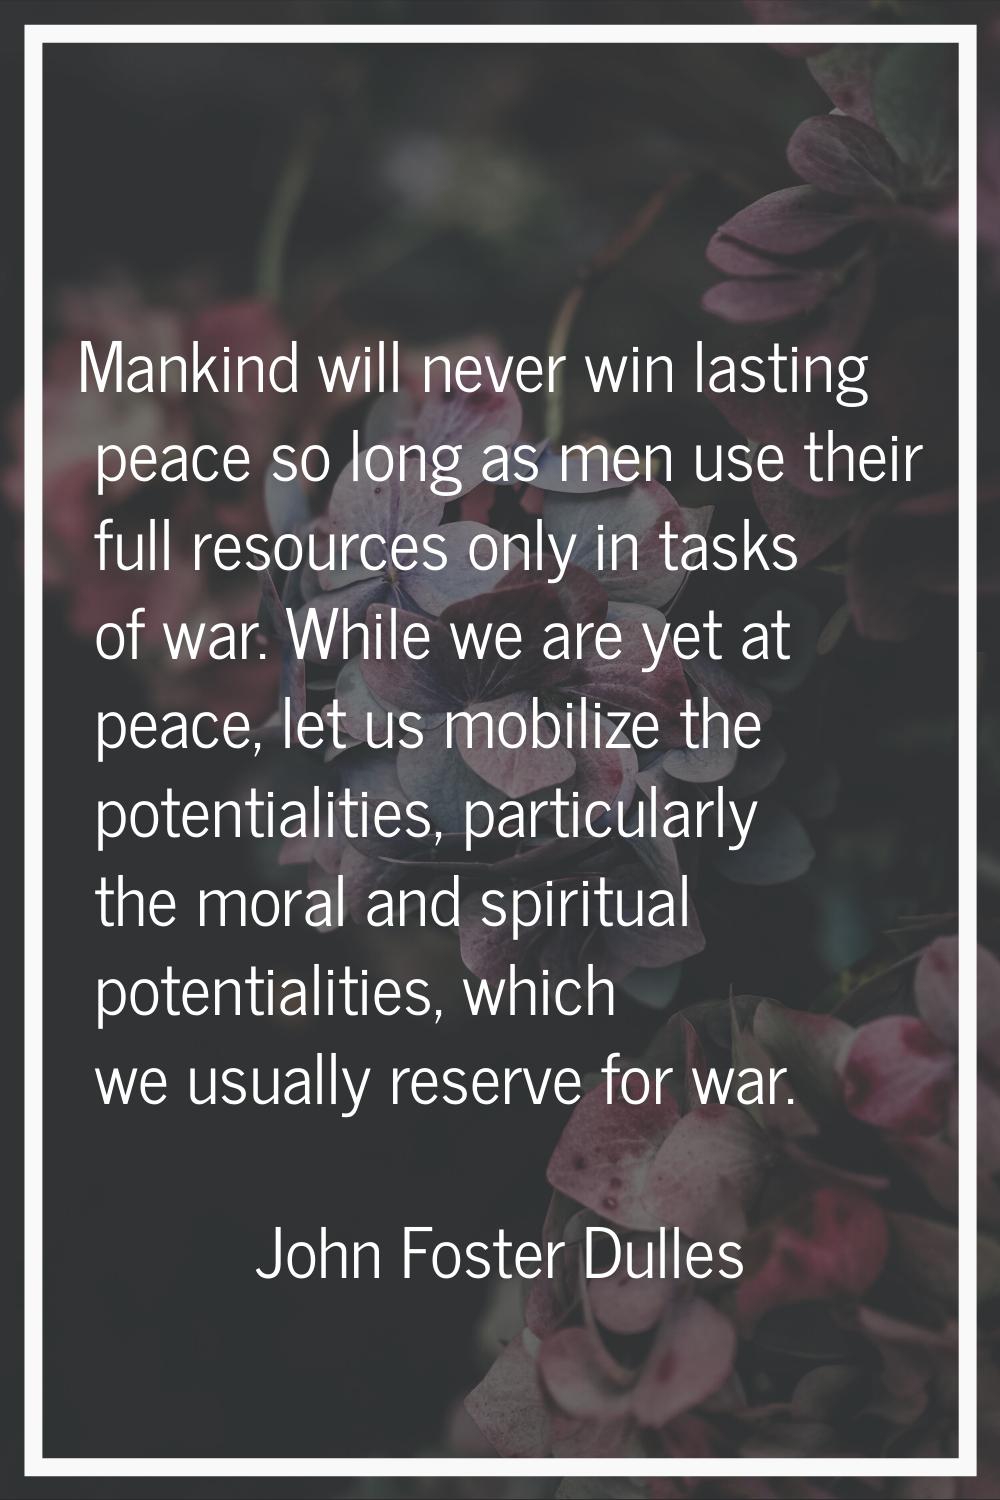 Mankind will never win lasting peace so long as men use their full resources only in tasks of war. 